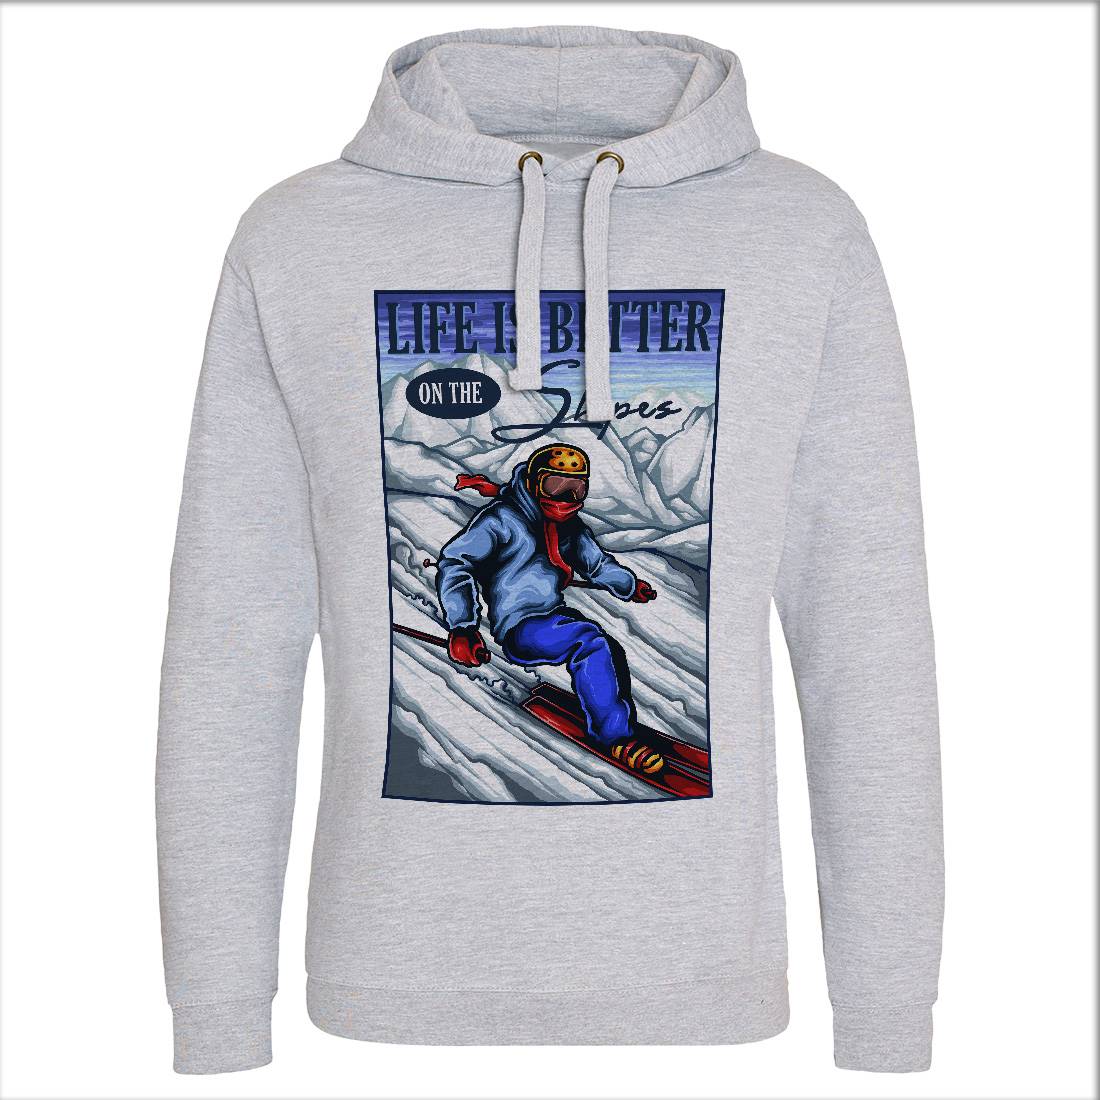 Ski Life Mens Hoodie Without Pocket Sport A464